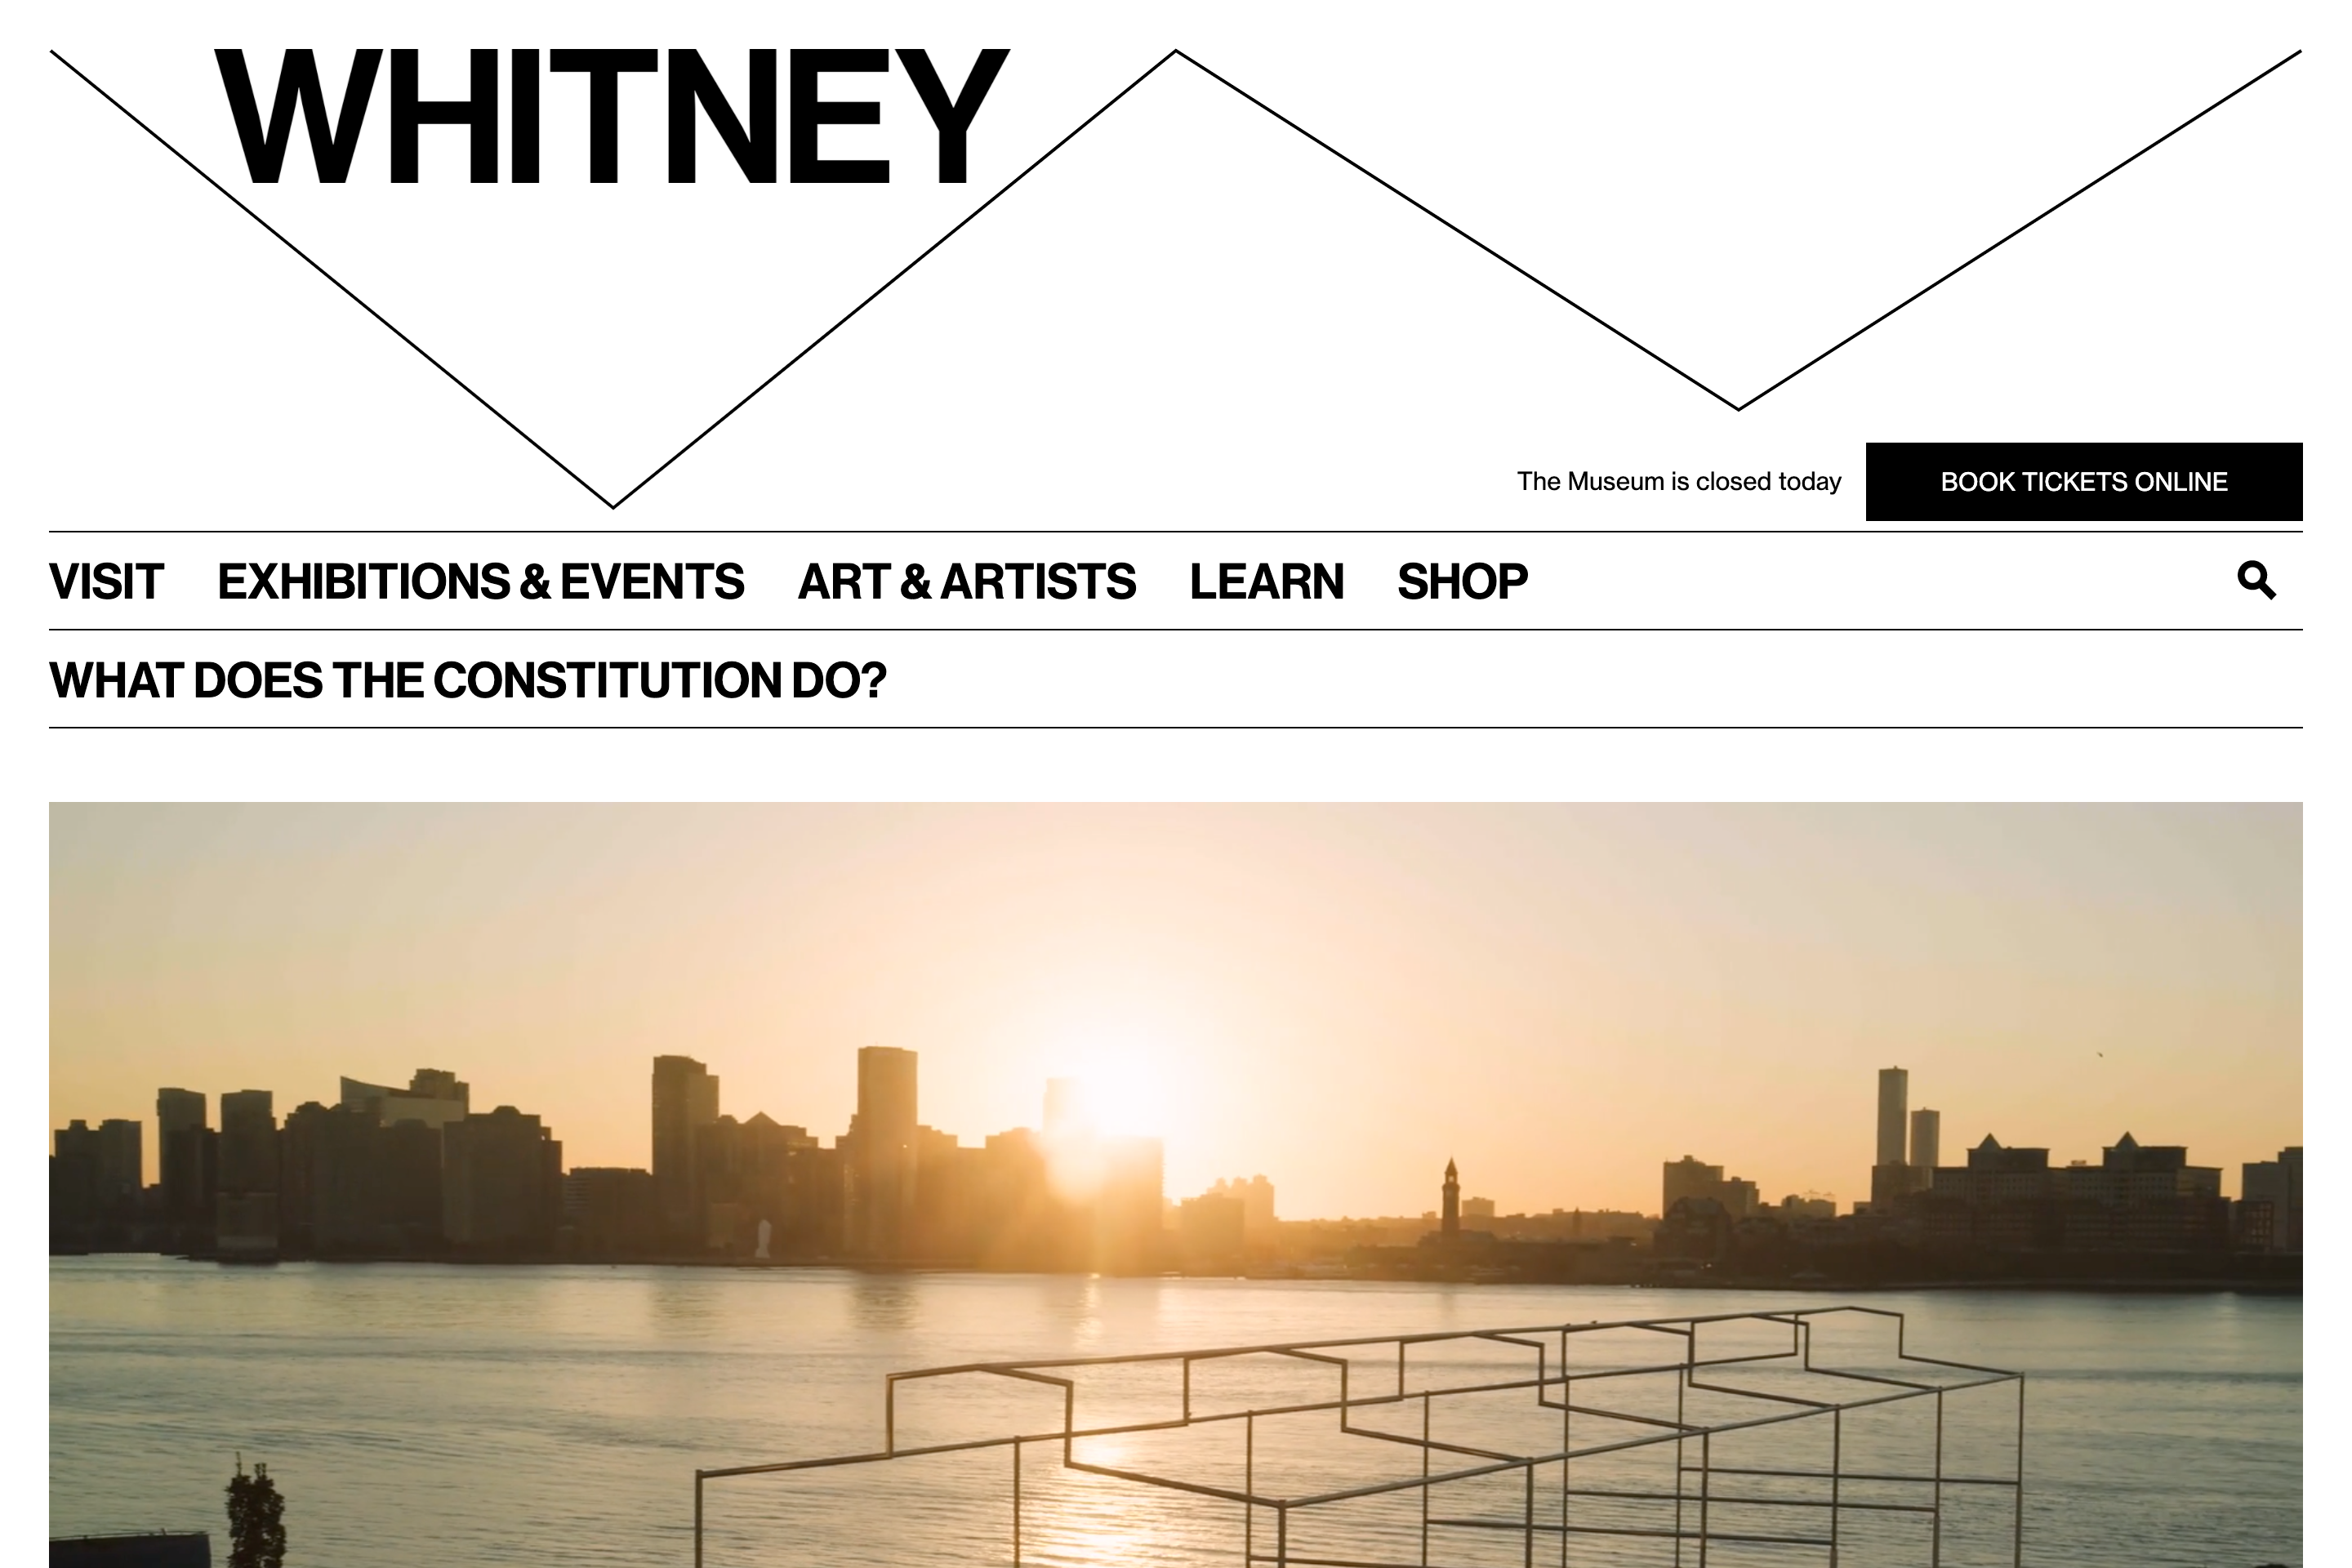 Screenshot of whitney.org homepage, with additional text below the navigation that says "What Does the Constitution Do?"